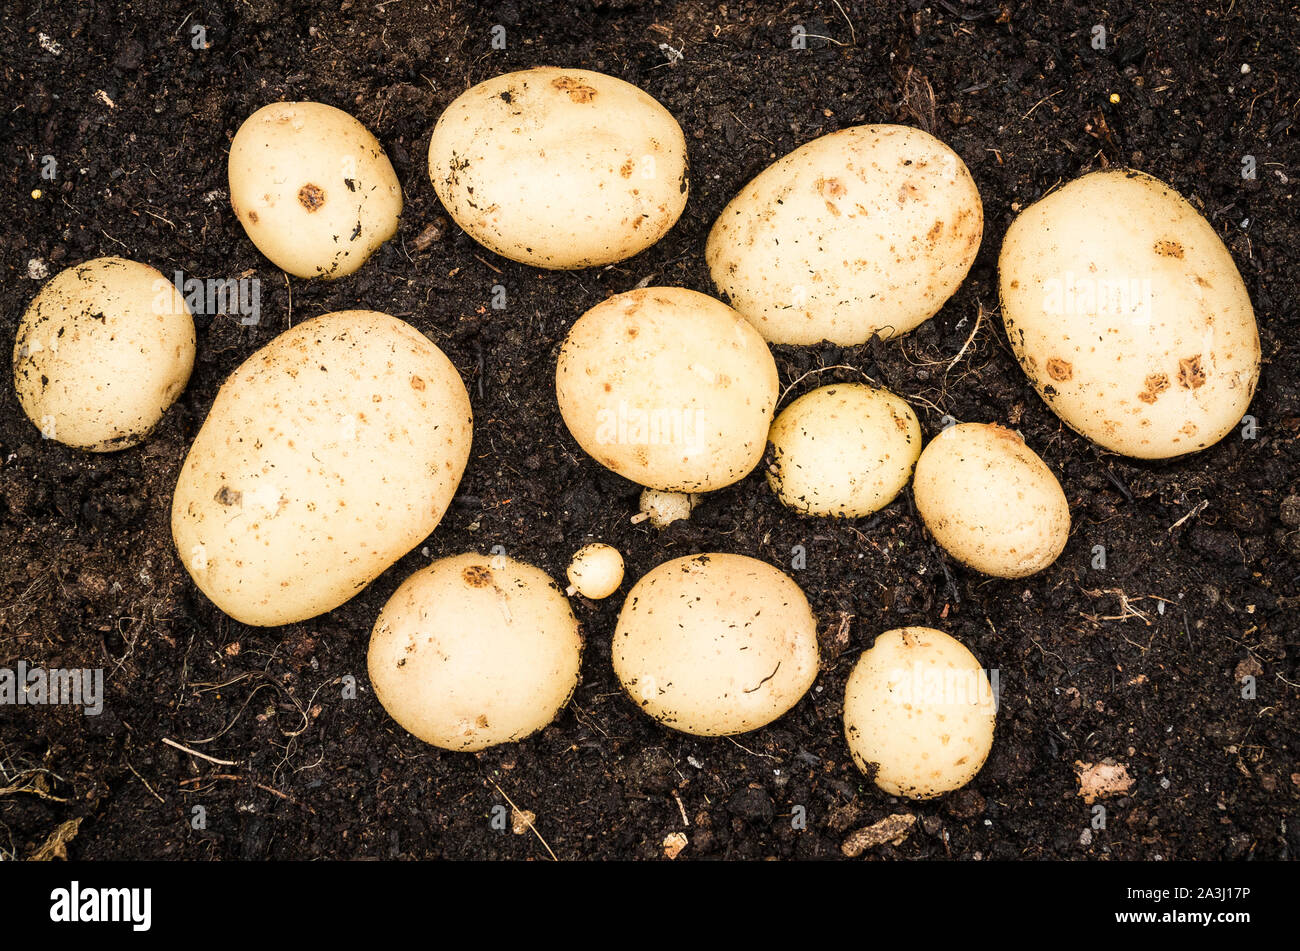 Newly dug second early potatoes Gemson lying on the soil surface in England UK Stock Photo